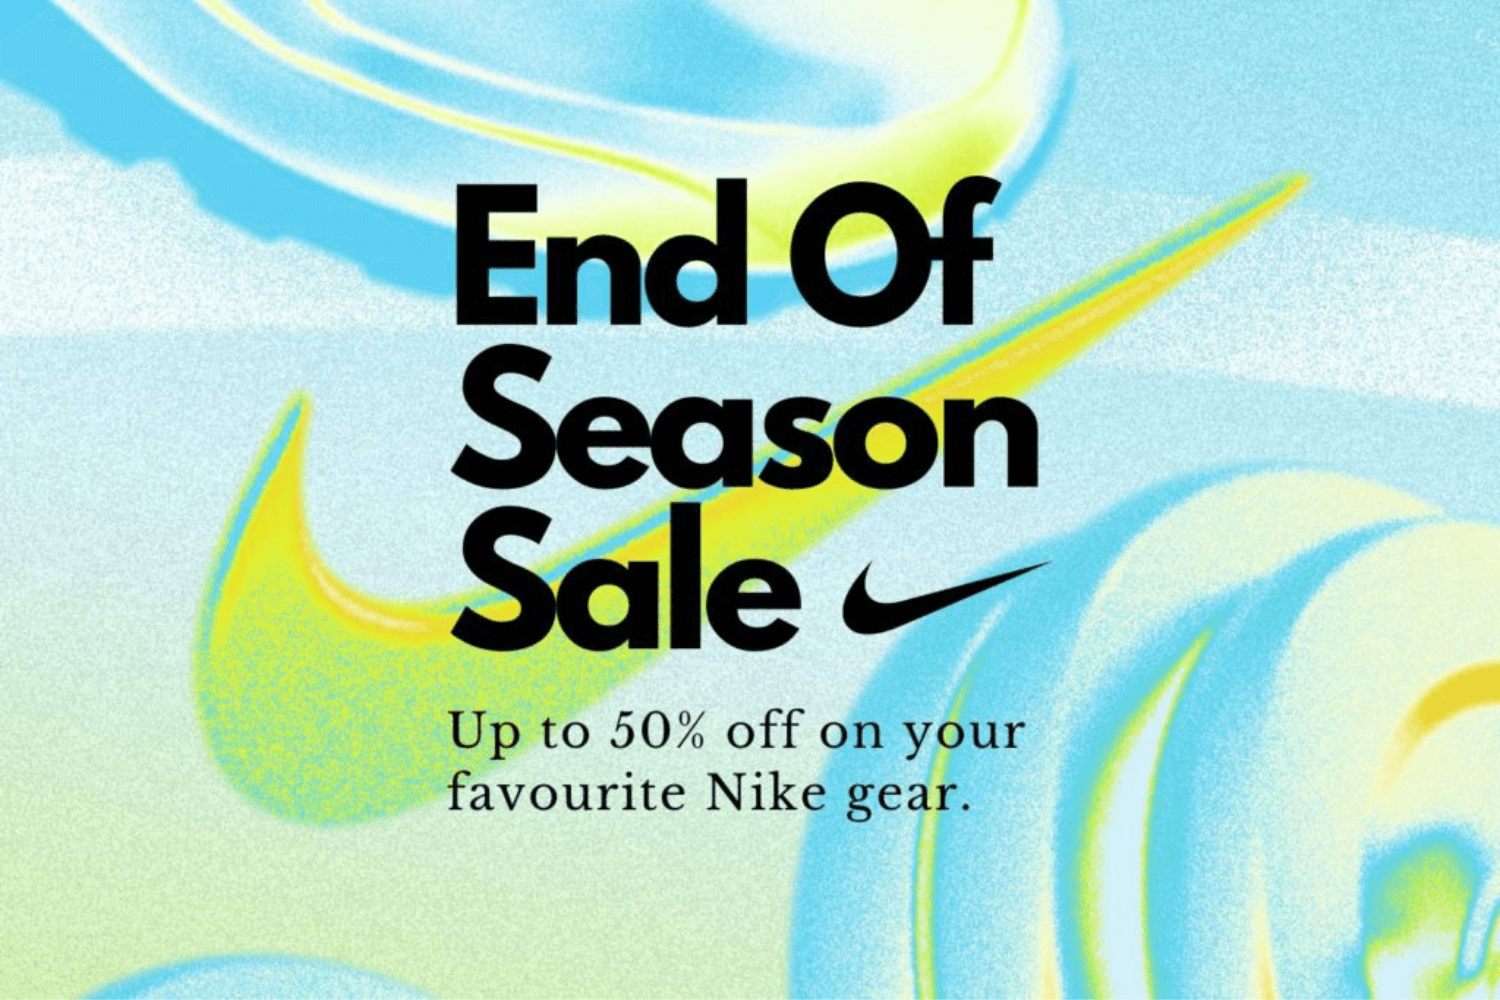 Nike end of season sale comes with high discounts